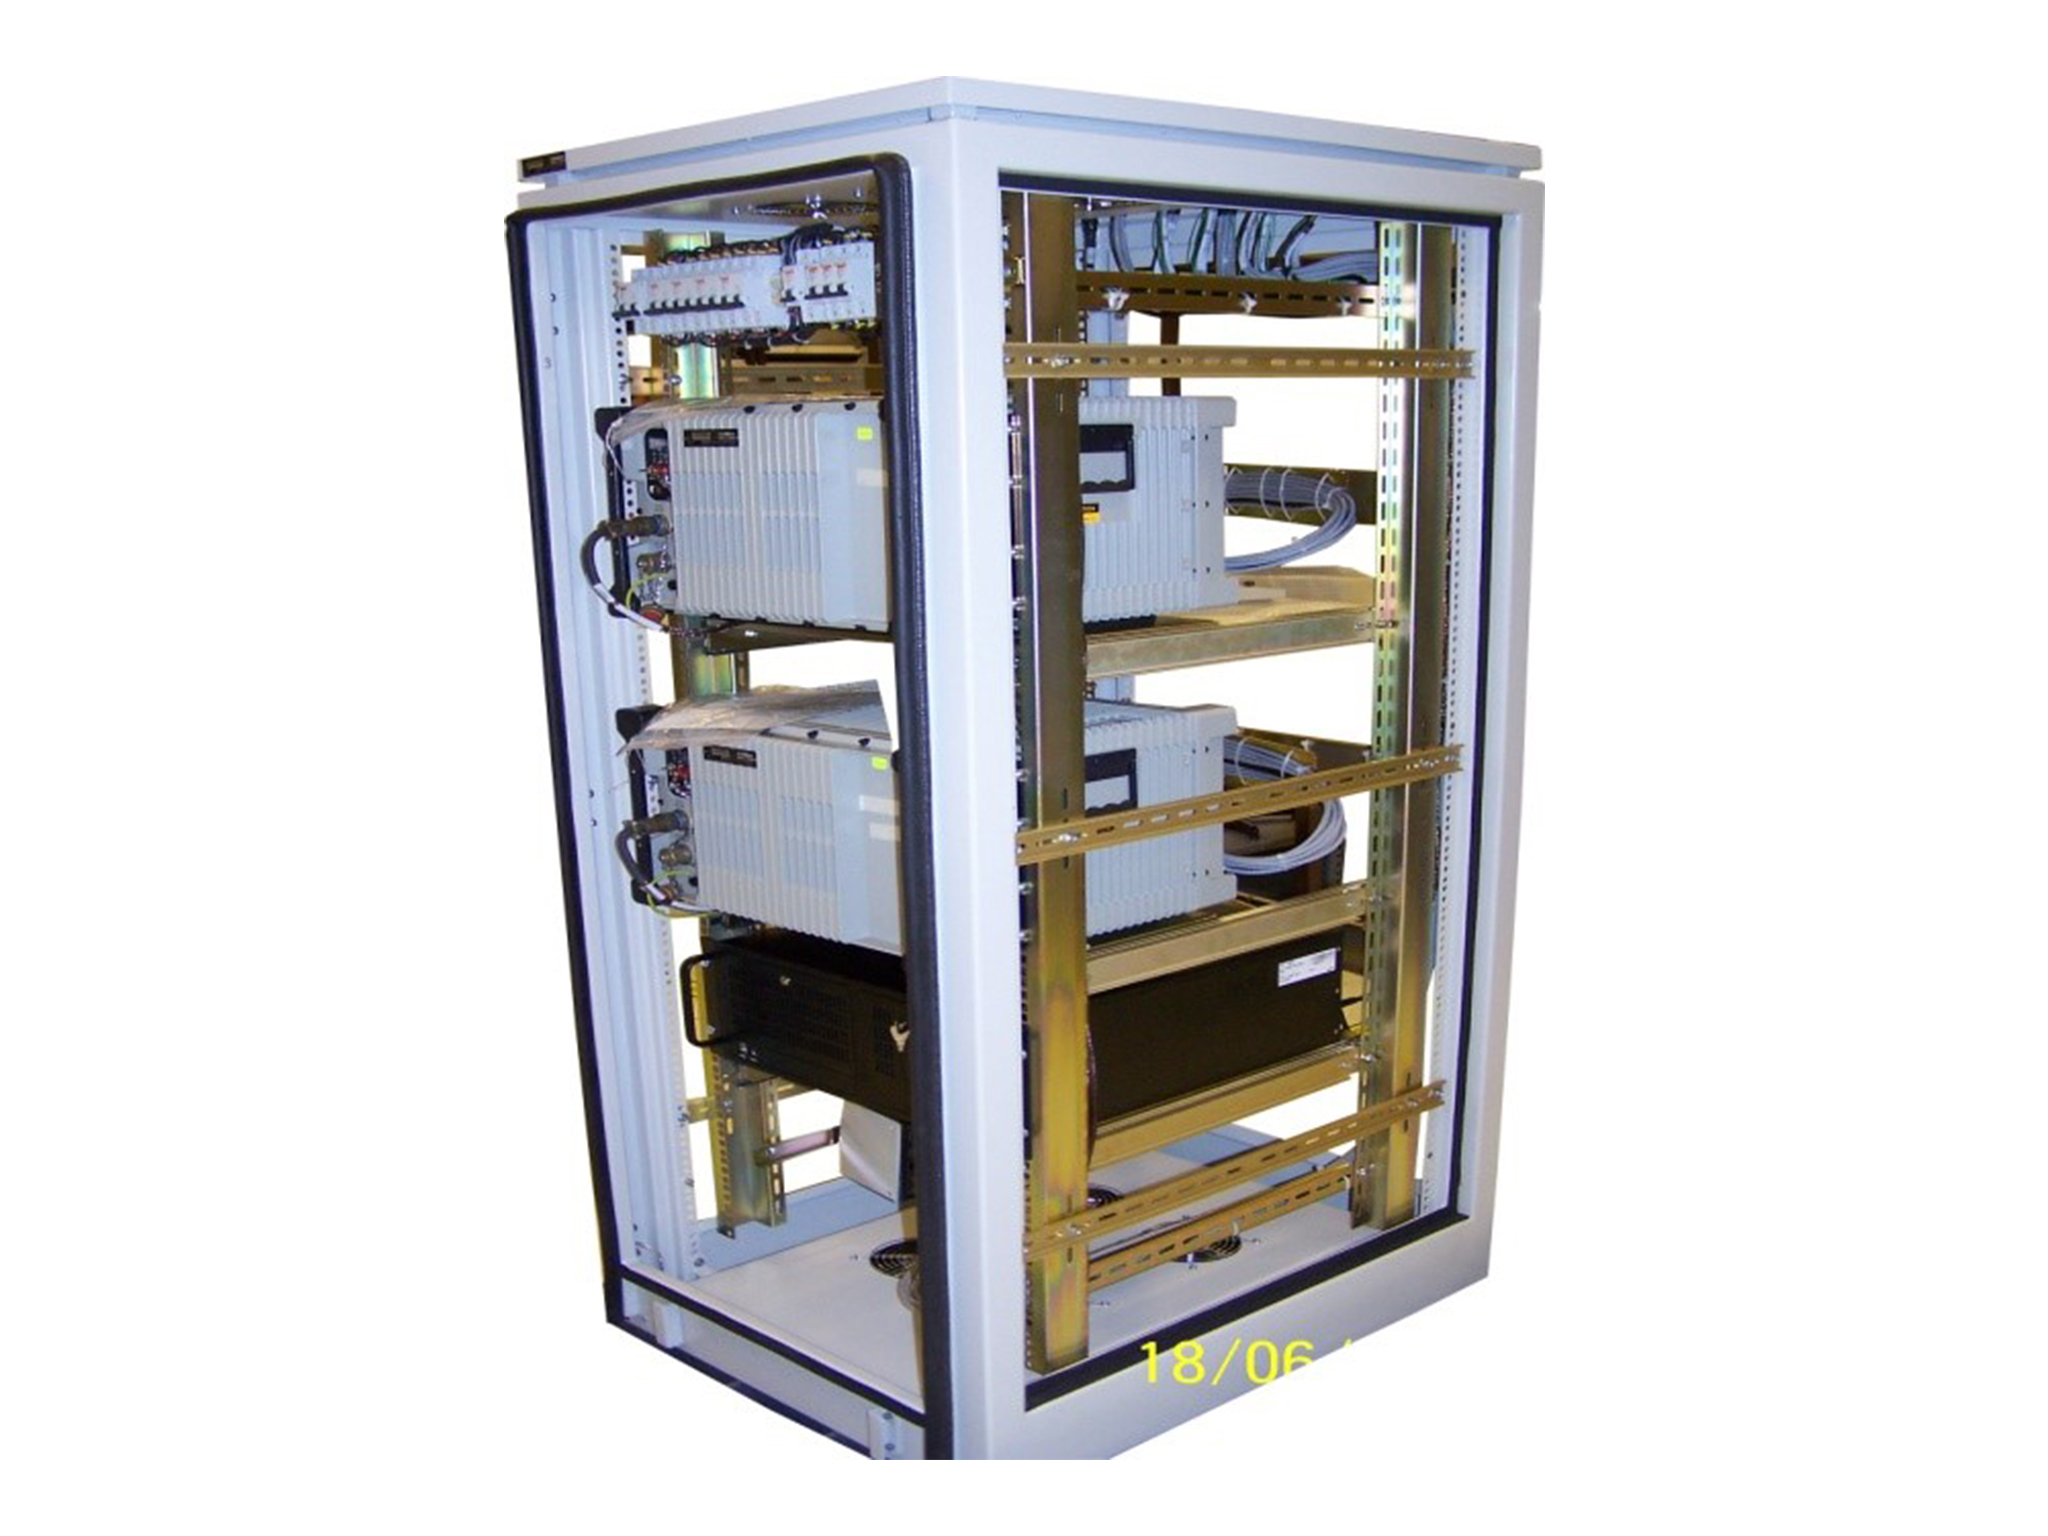 19 inch Rack Cabinet Systems